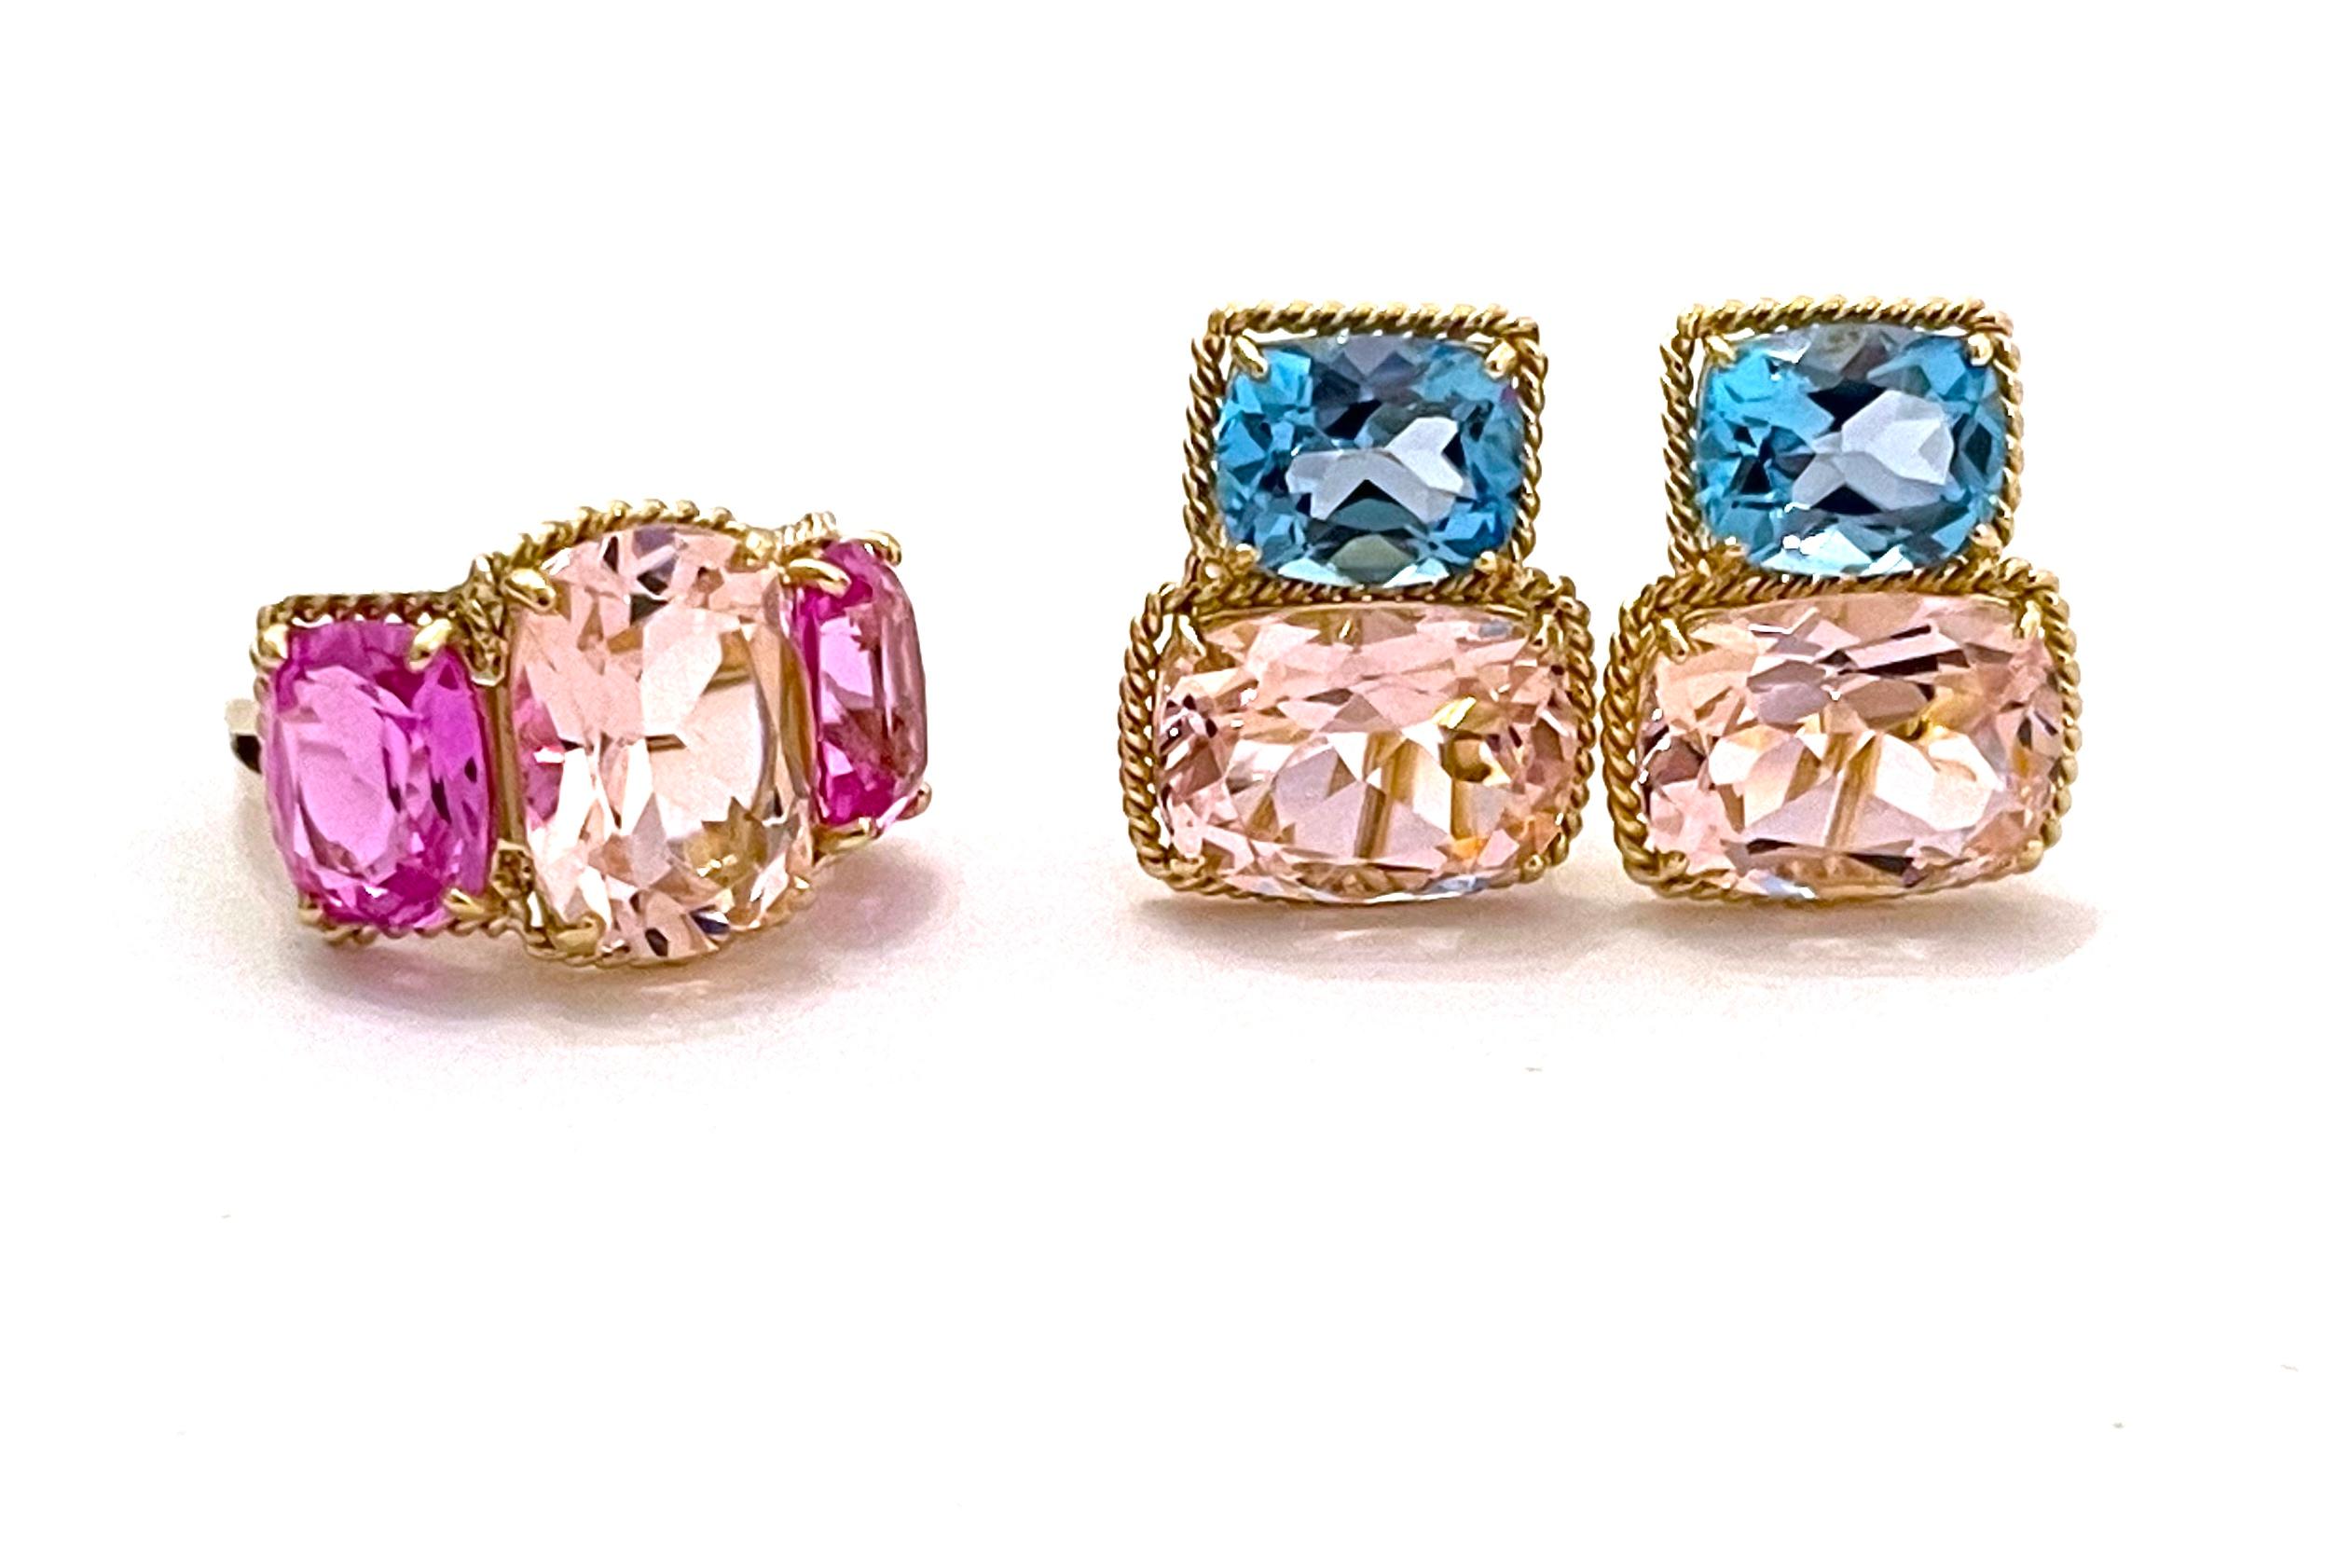 Elegant Three-Stone Rock Crystal and Pink Topaz Ring with Gold Rope Twist Border For Sale 3